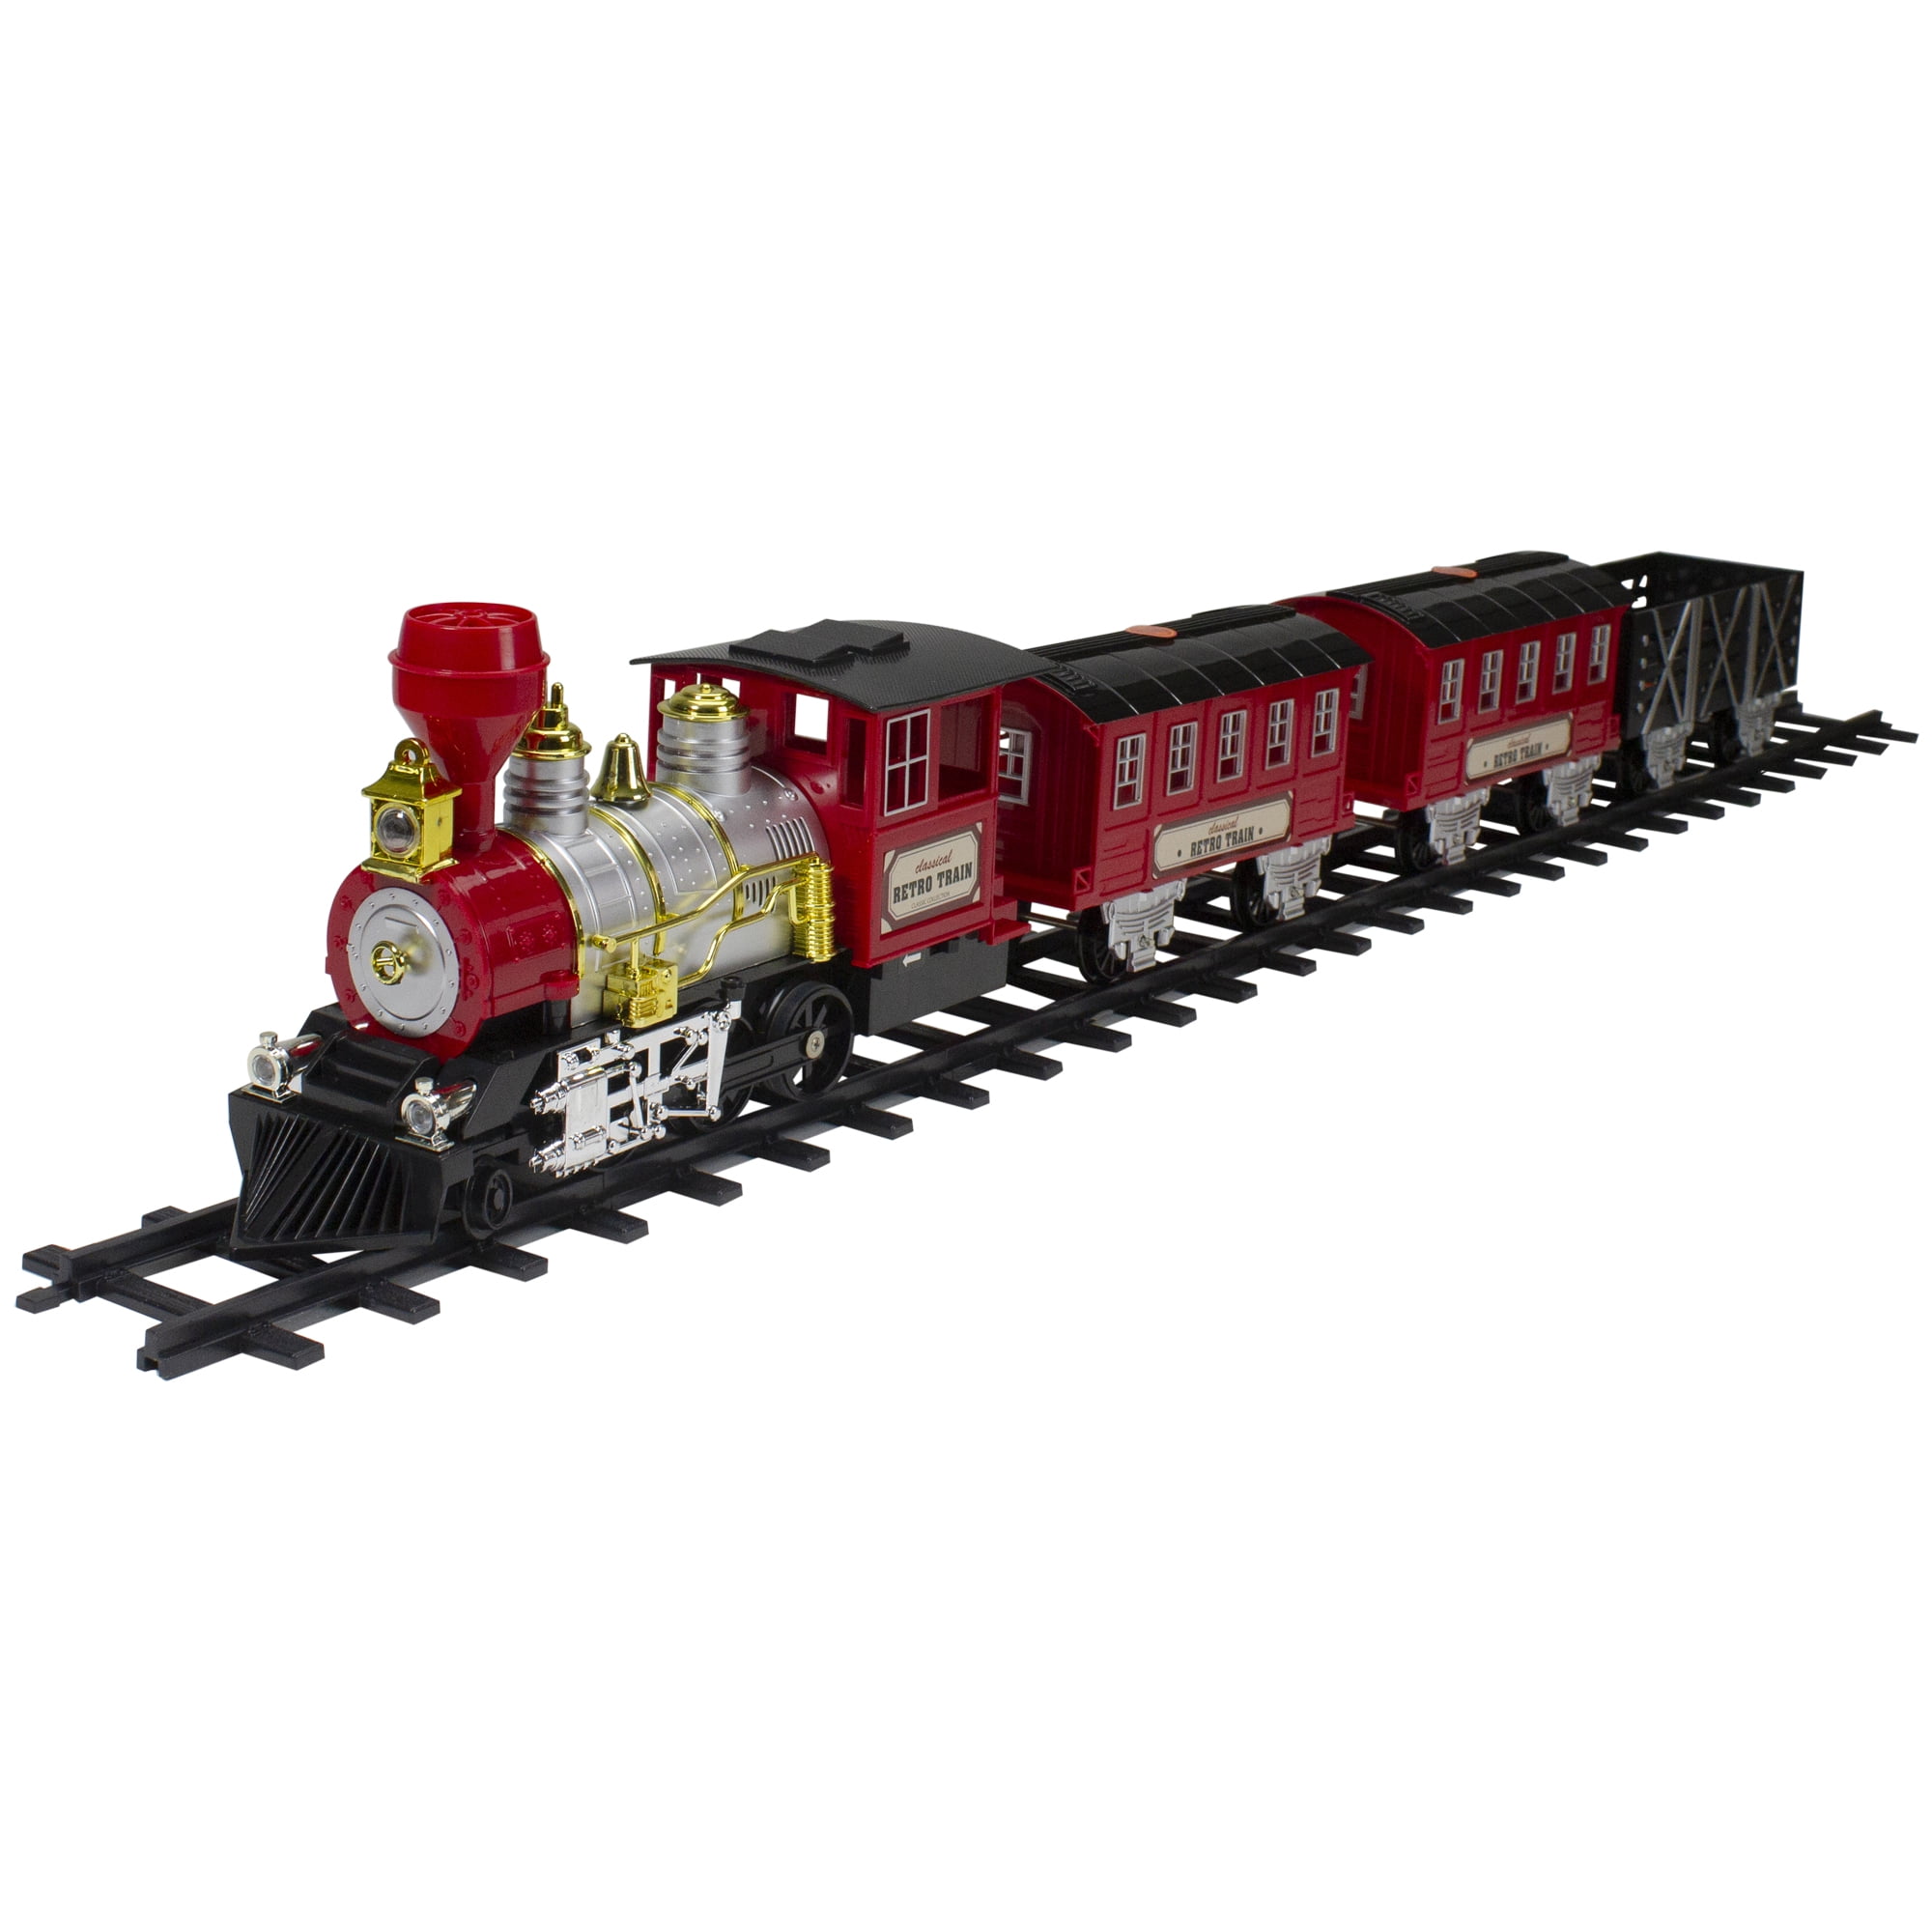 Premier Train Set Battery Operated Christmas Decoration AC151224 for sale online 